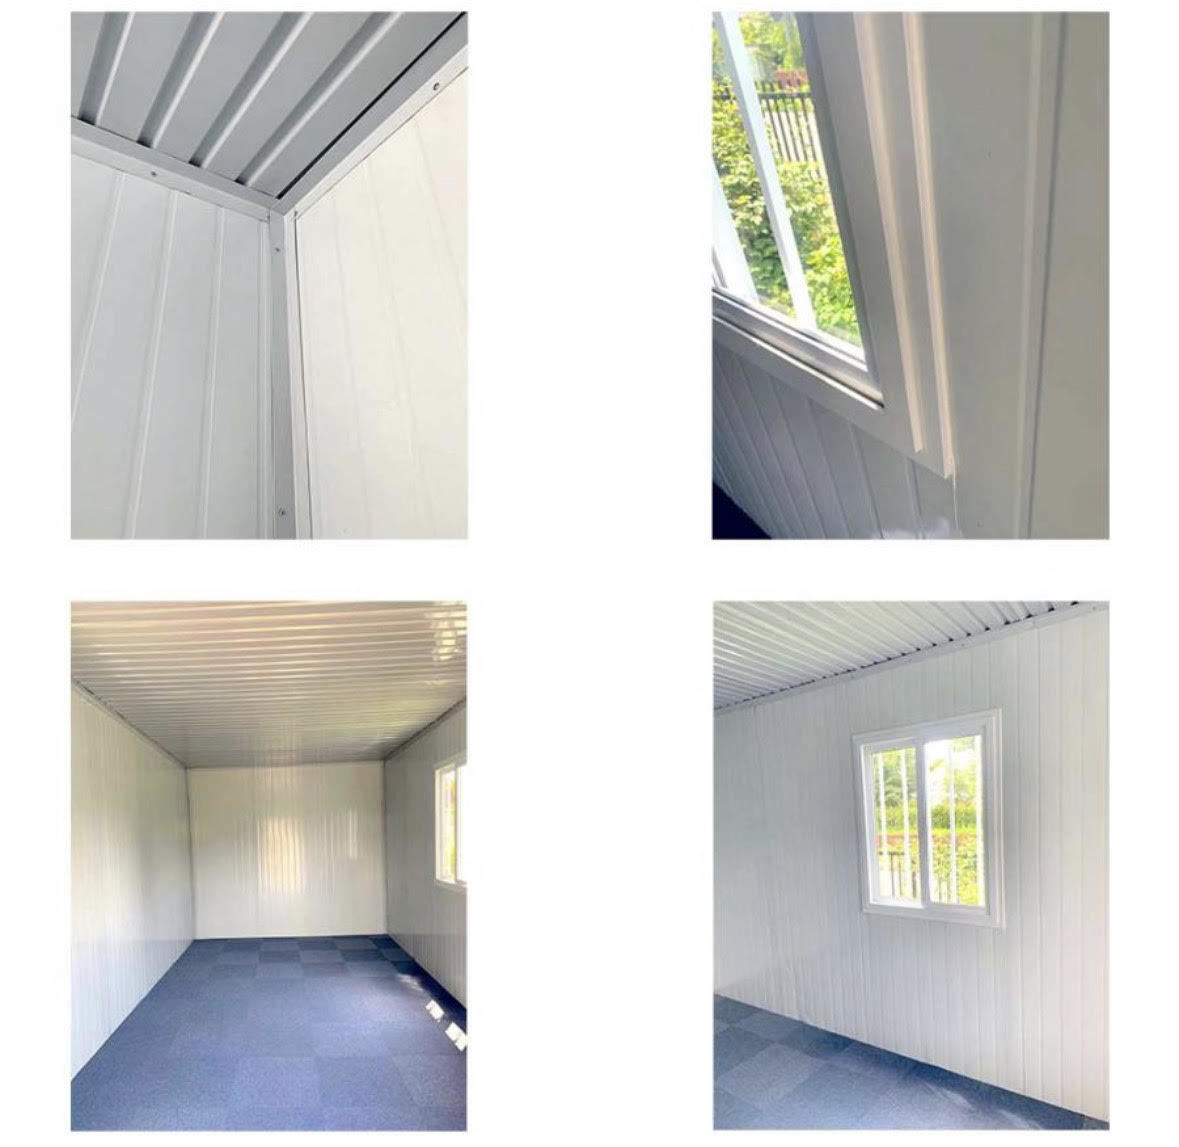  triangle roof . design characteristic * rain snow and ice control also! blue mi. construction type unit house prefab house container temporary super house storage room office work place 